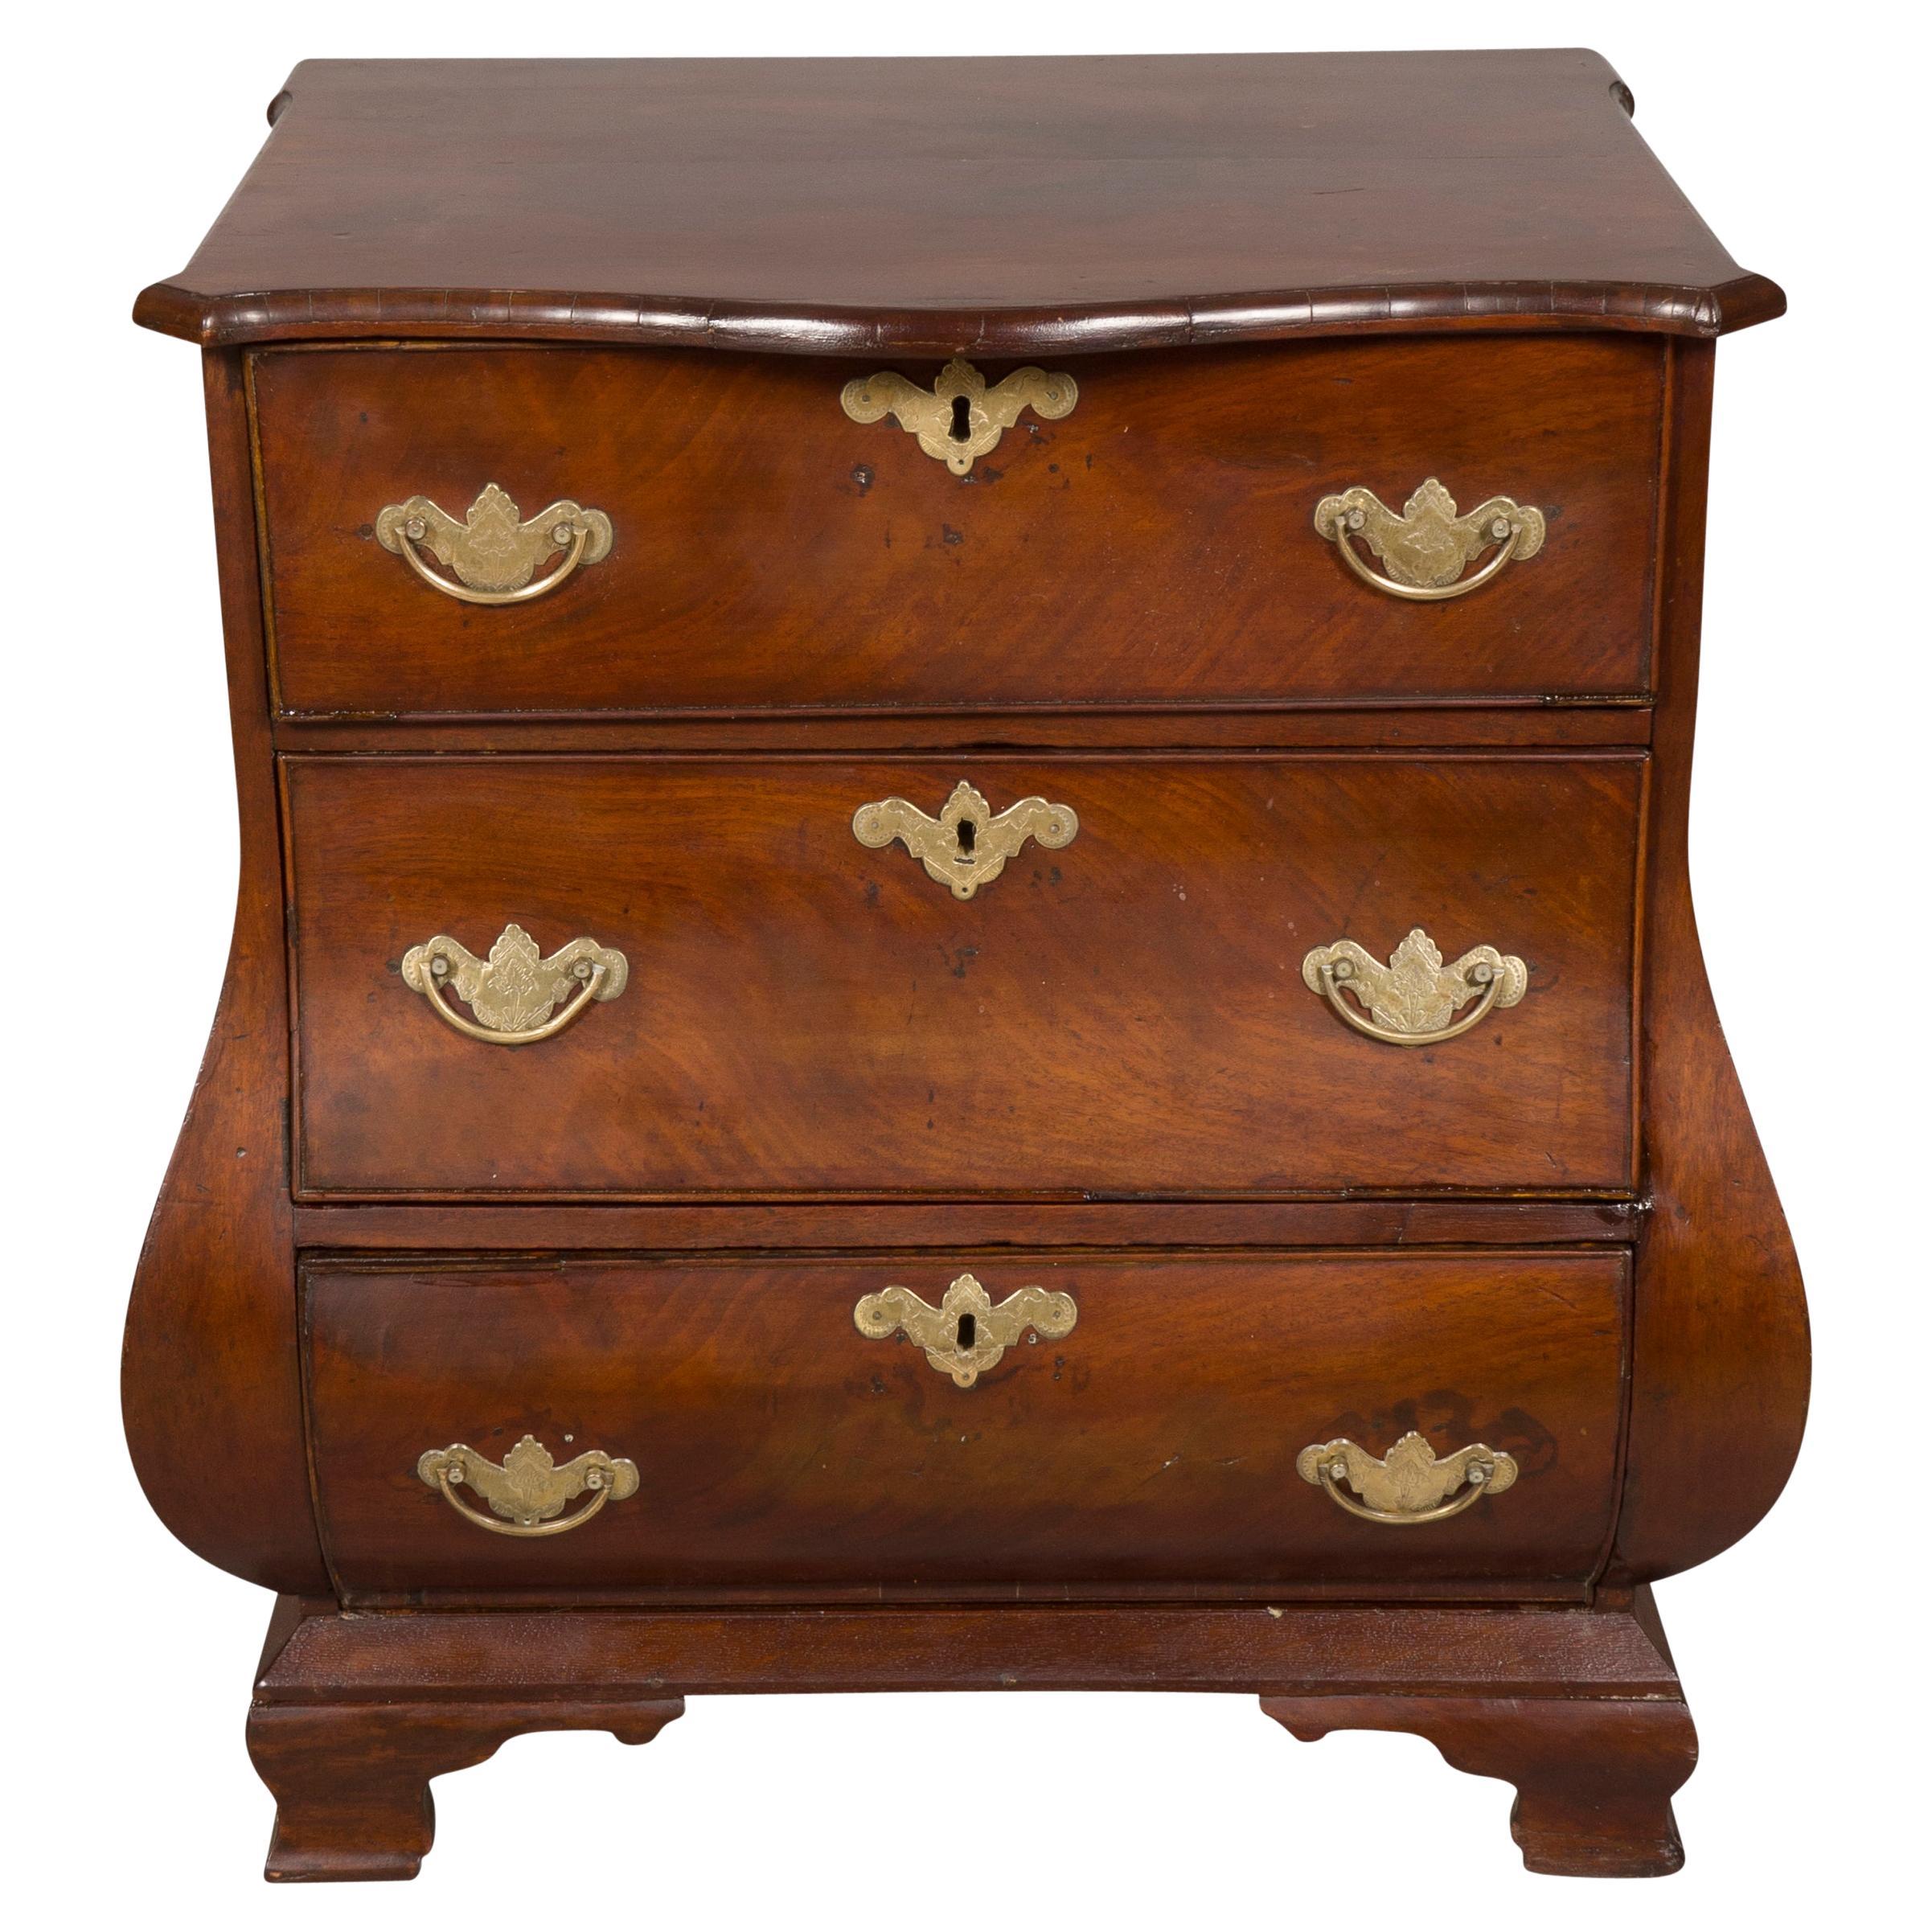 What is a dresser versus a chest of drawers?